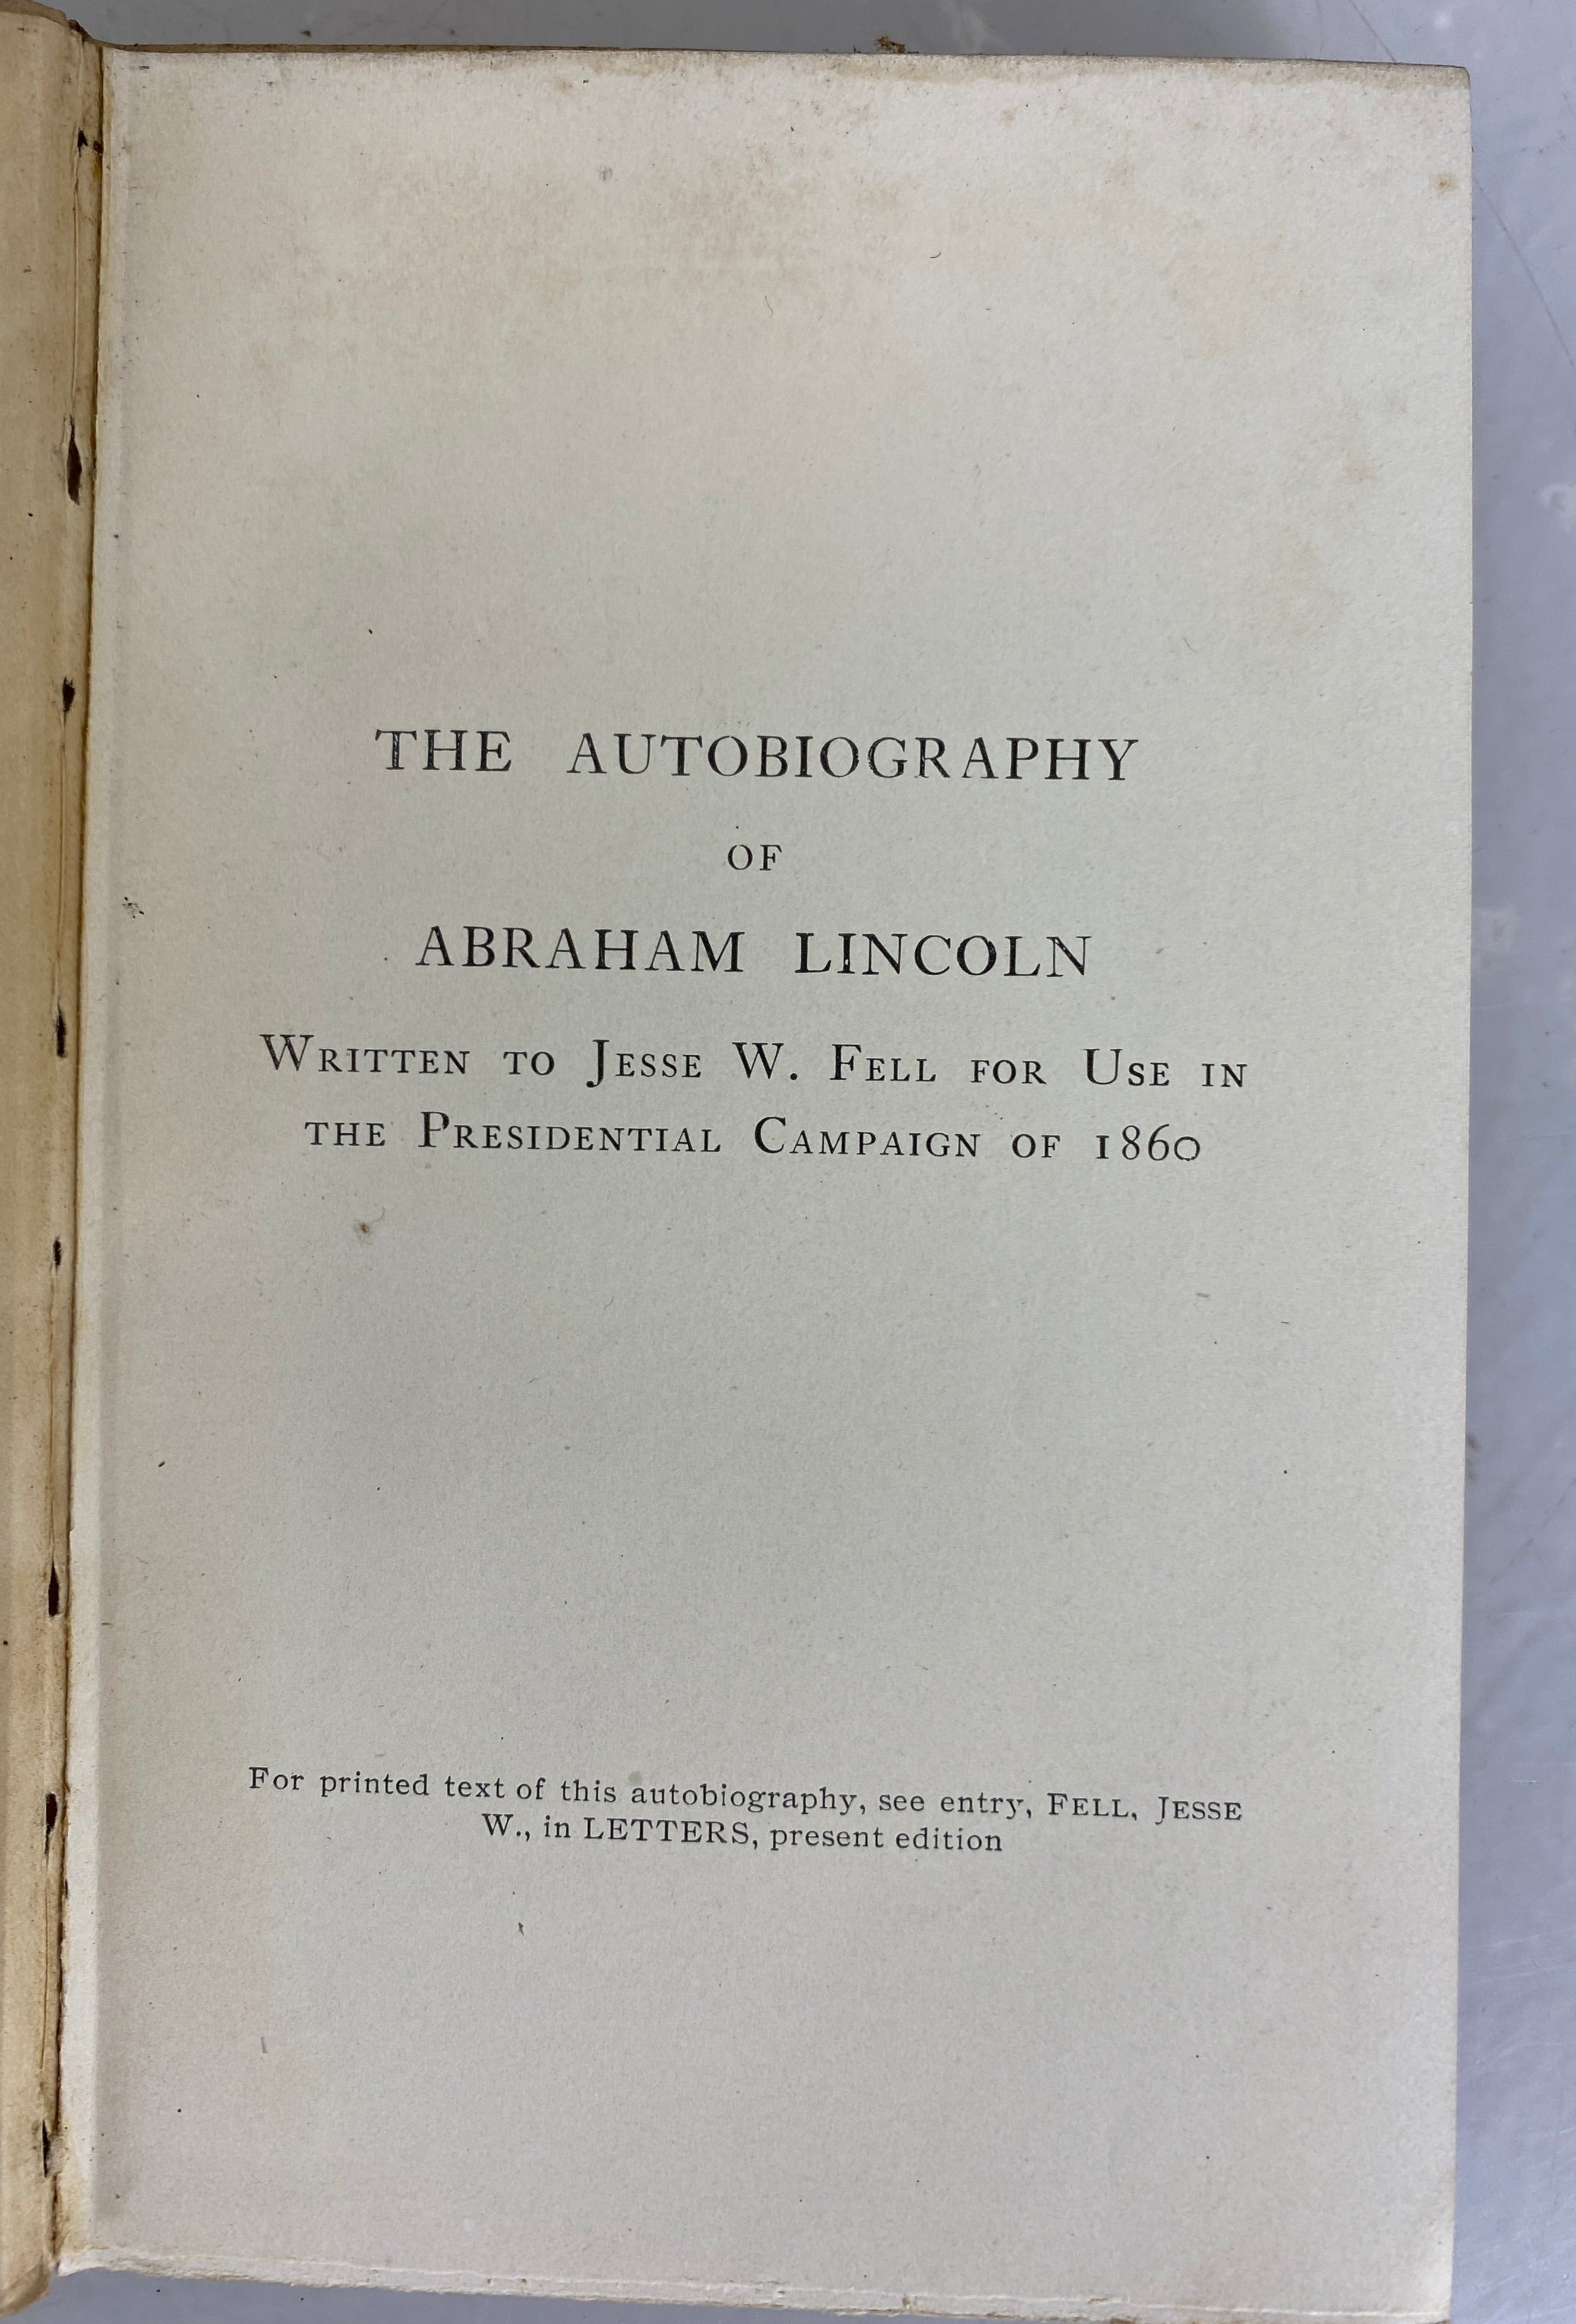 Complete 9 Vol Set: The Life and Works of Abraham Lincoln Centenary Ed 1907 HC